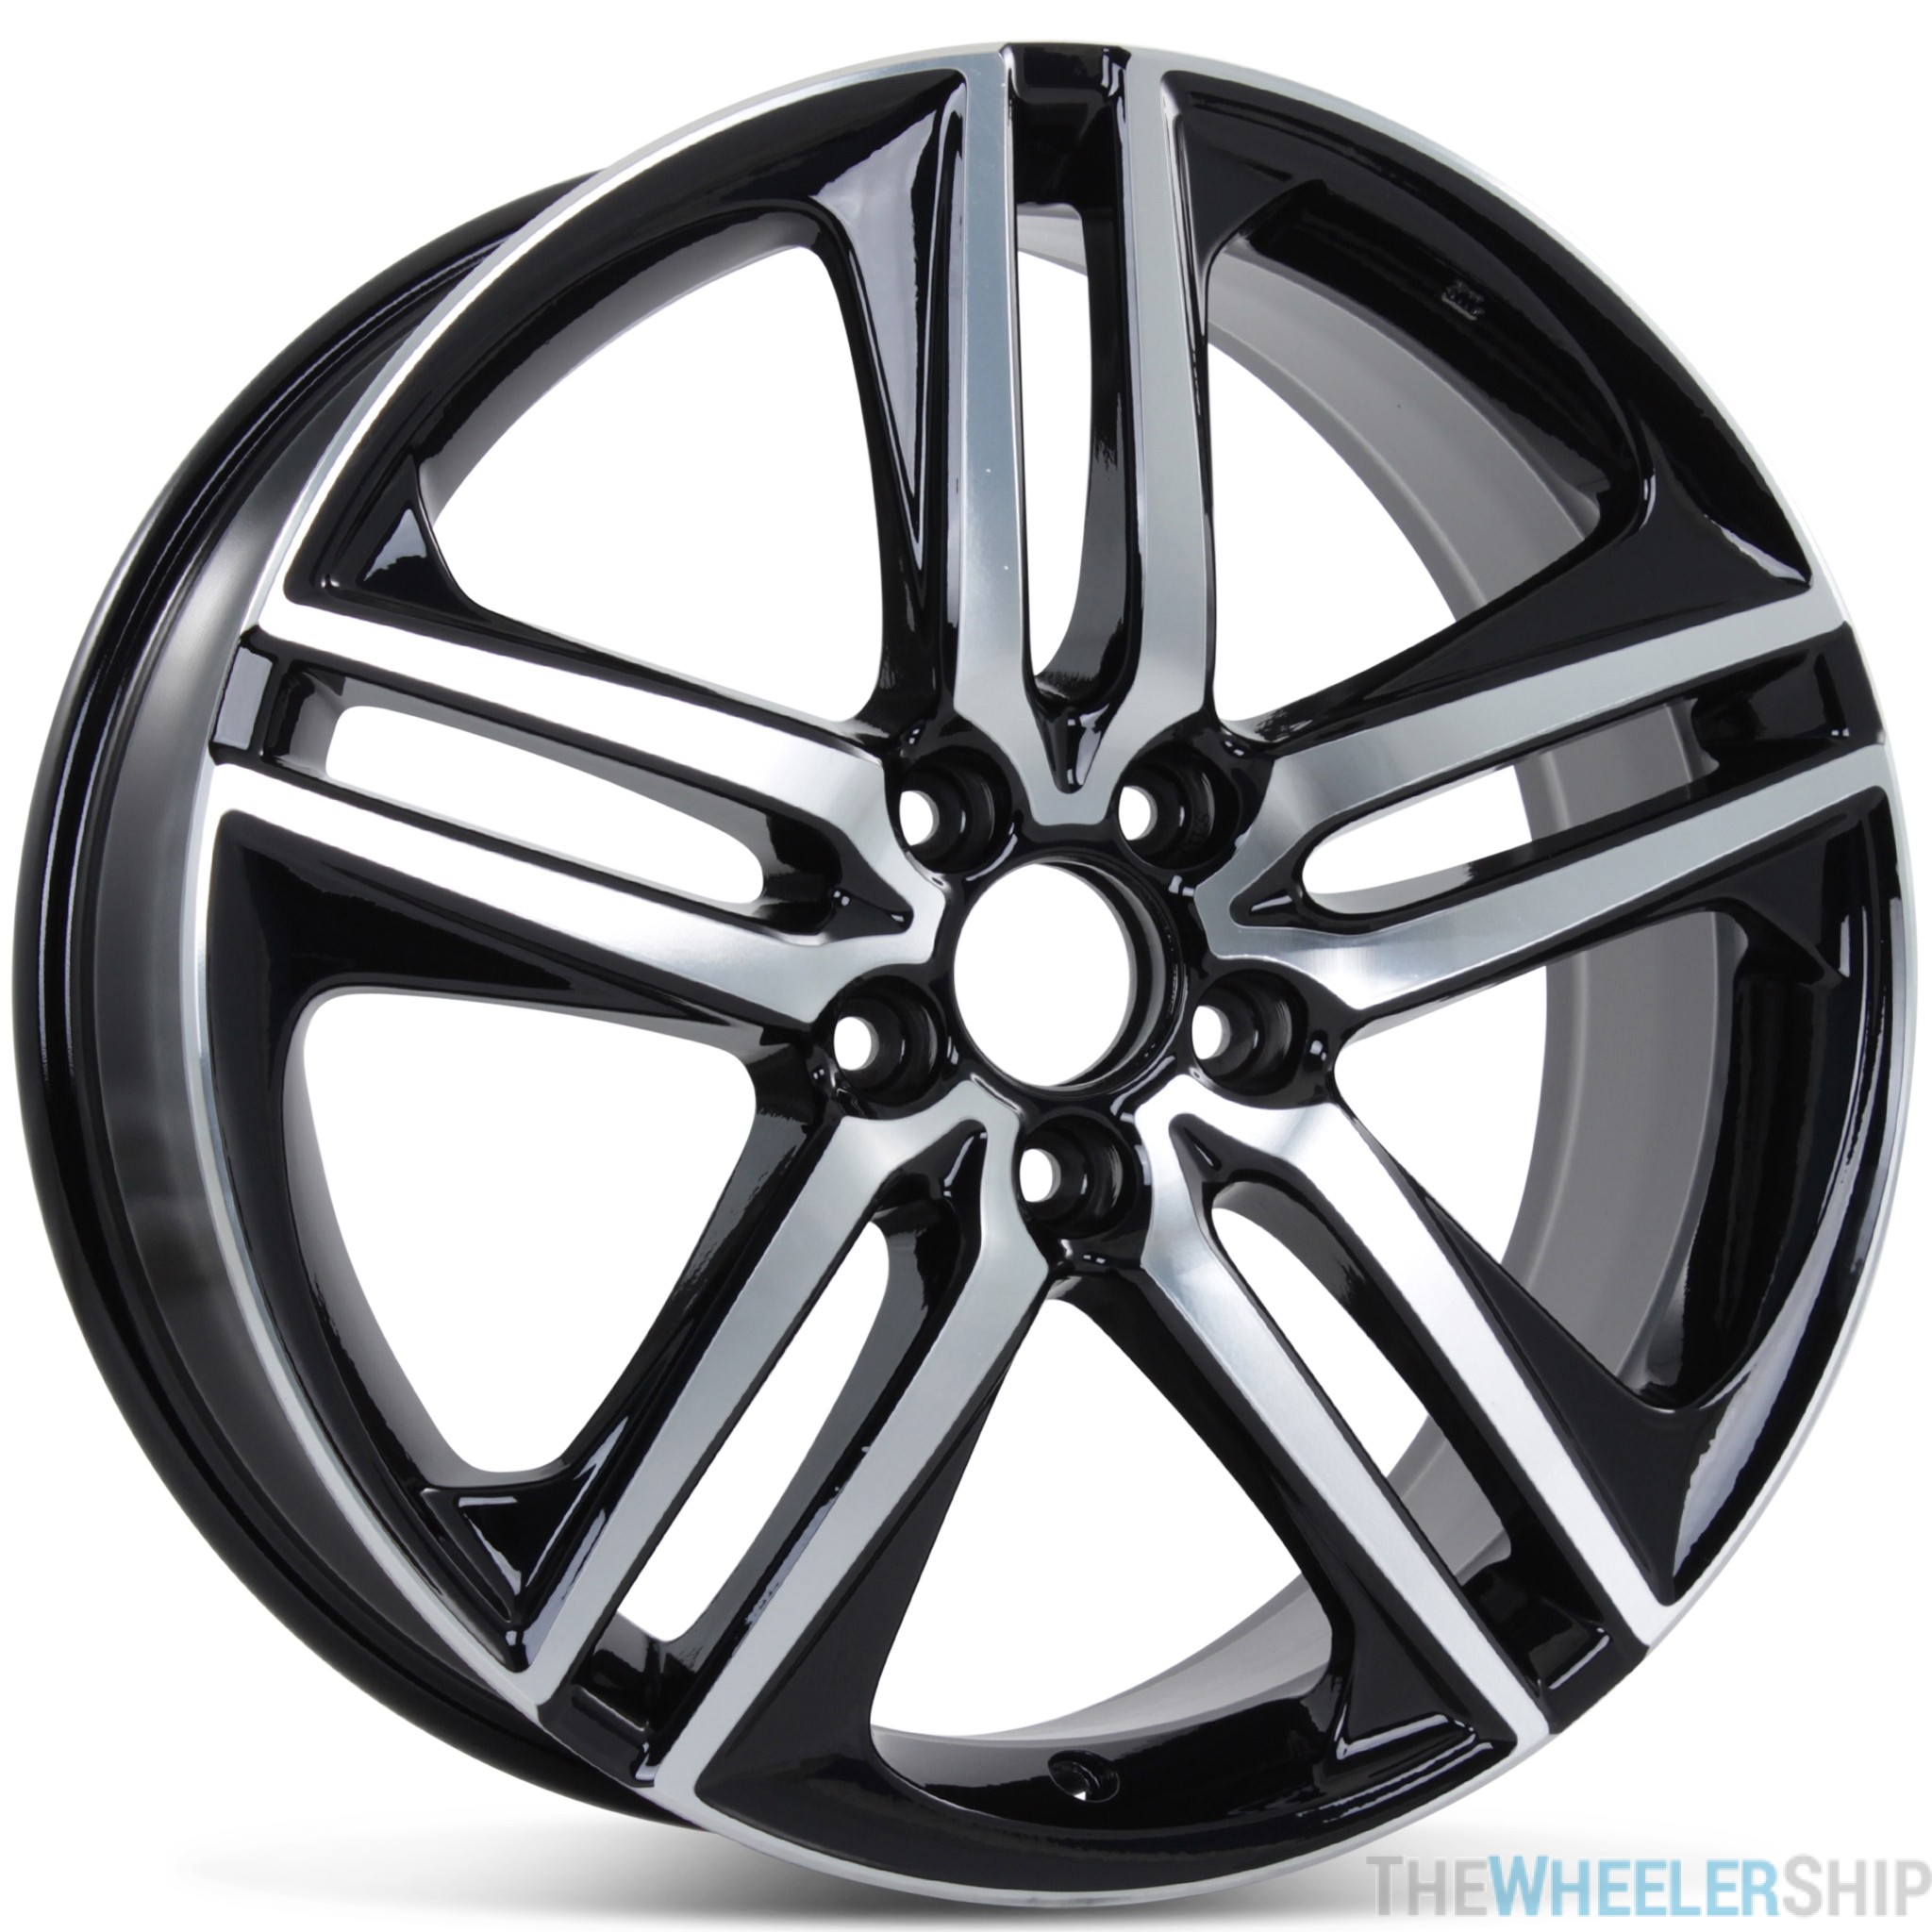 Set of 4 New 19" x 8" Replacement Wheel for Honda Accord Sport 2016